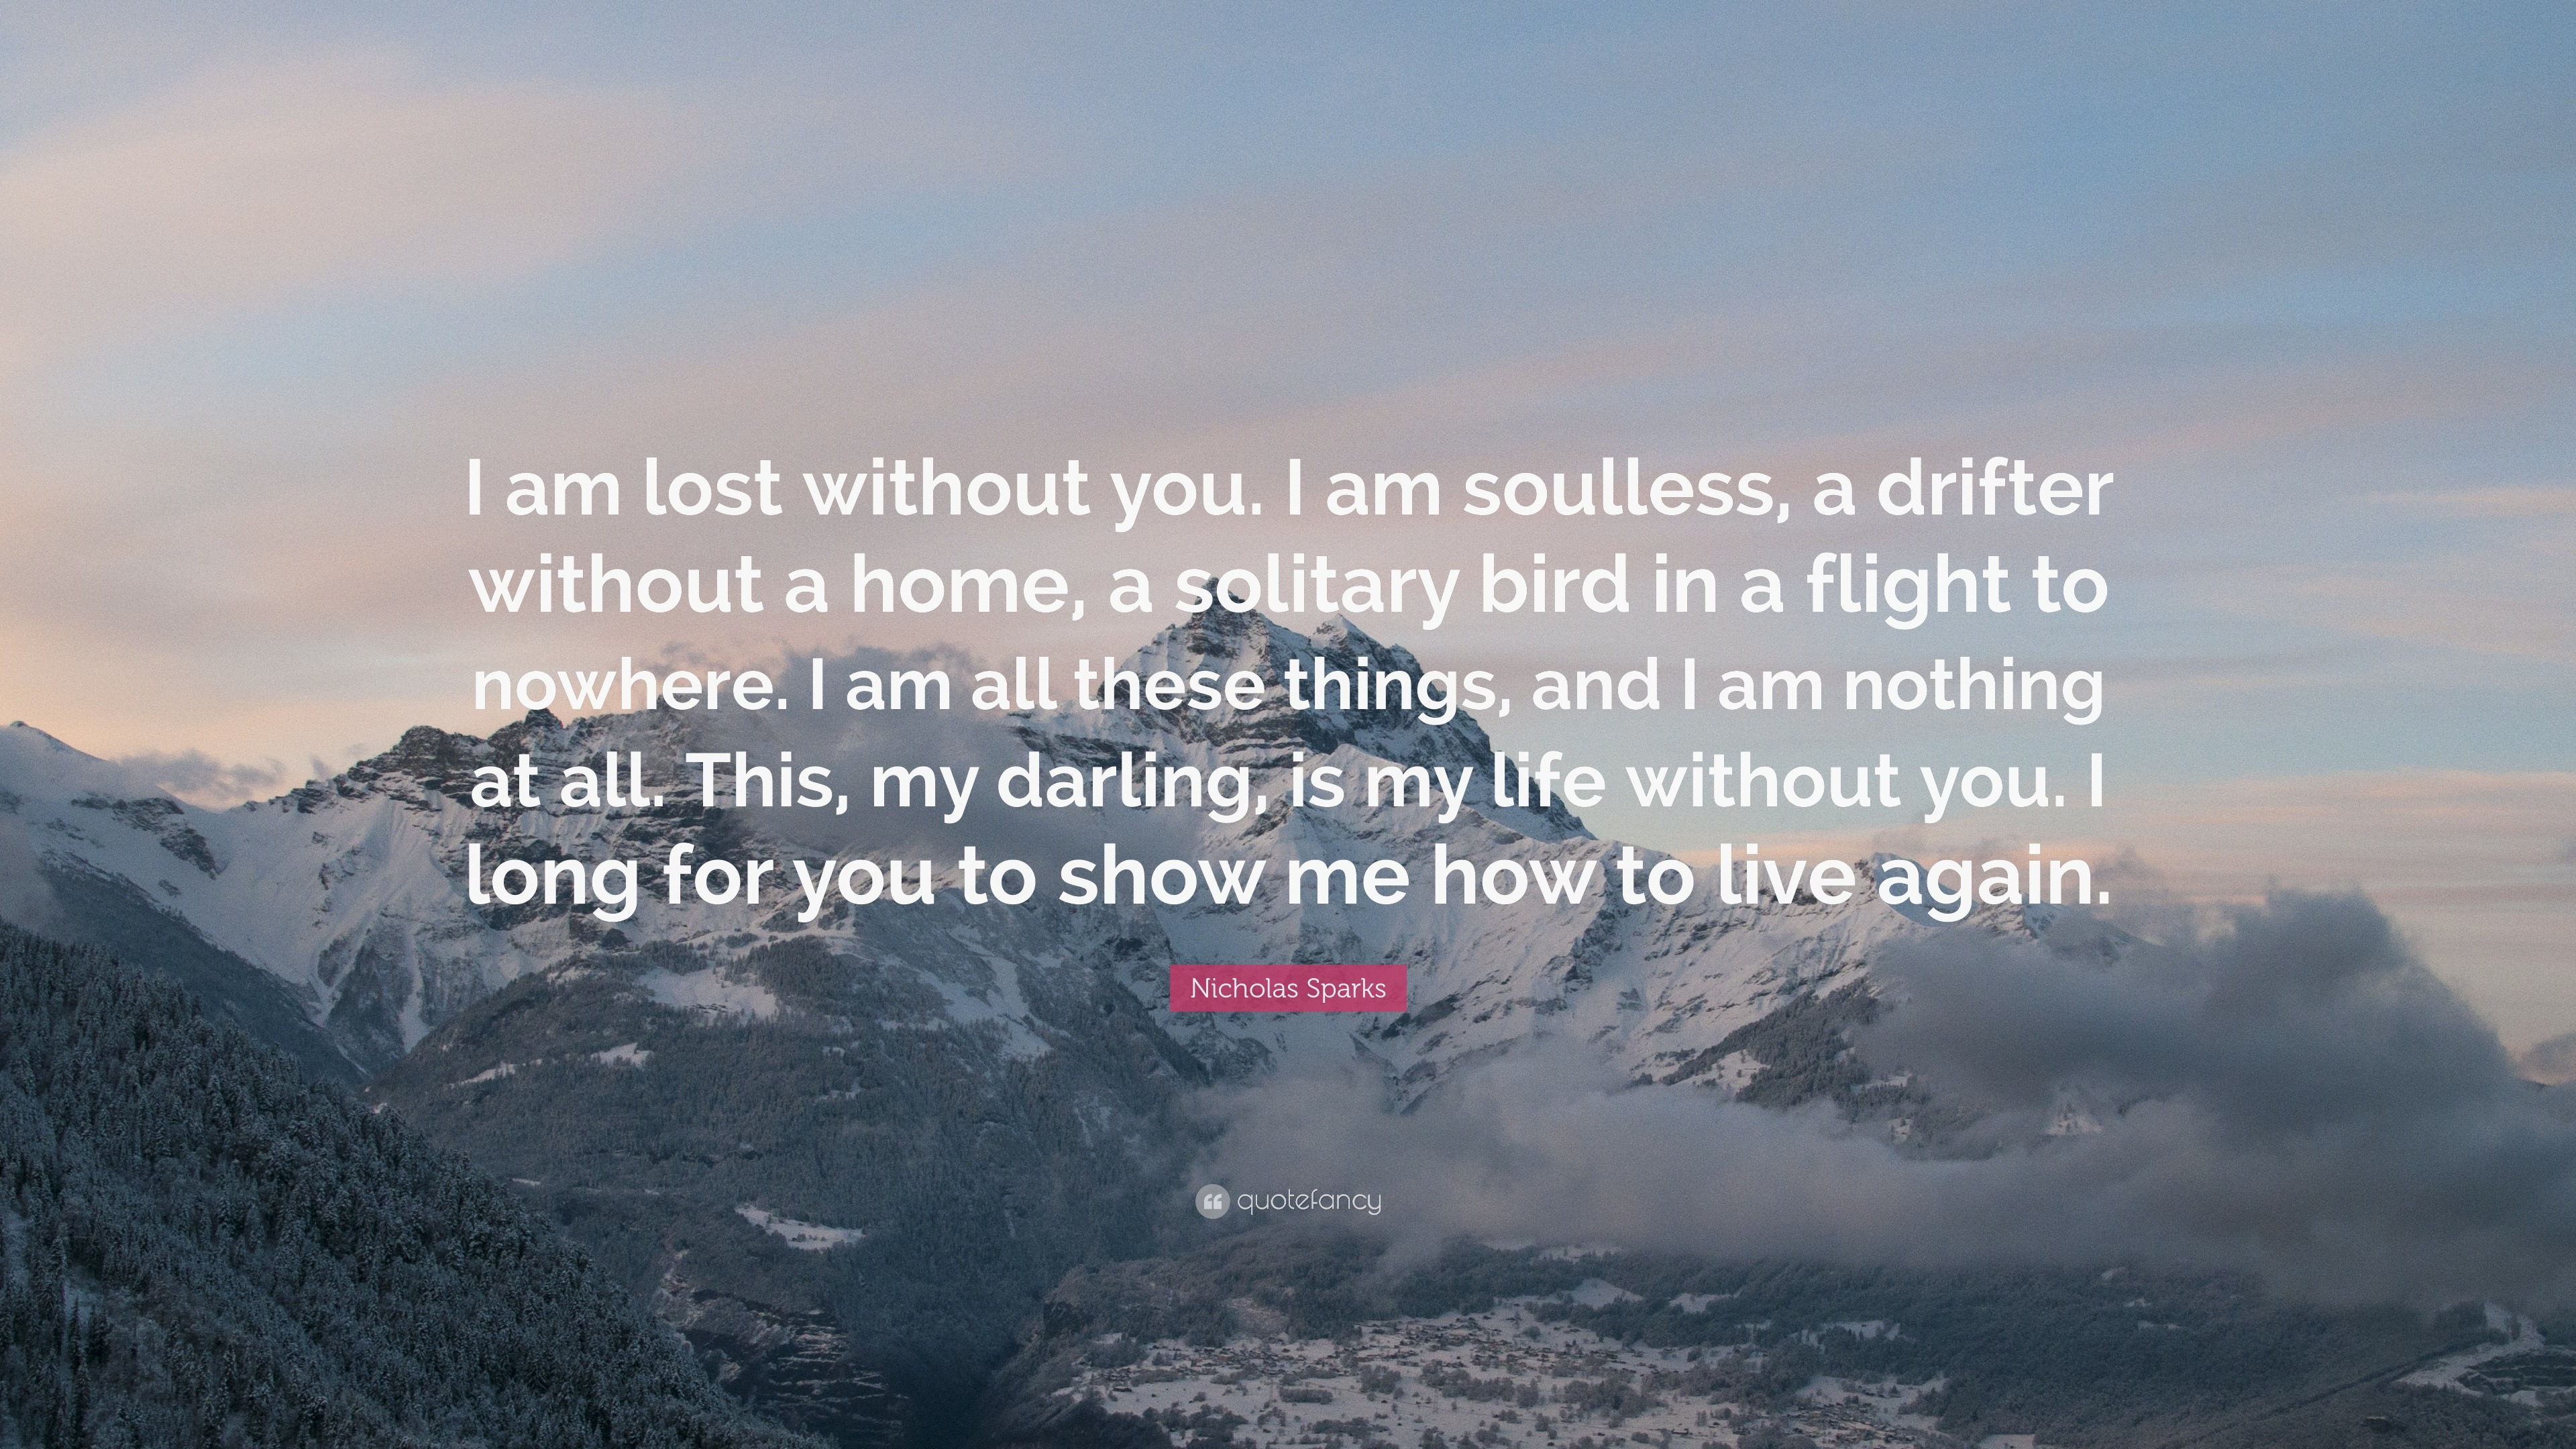 Nicholas Sparks Quote: “I am lost without you. I am soulless, a drifter